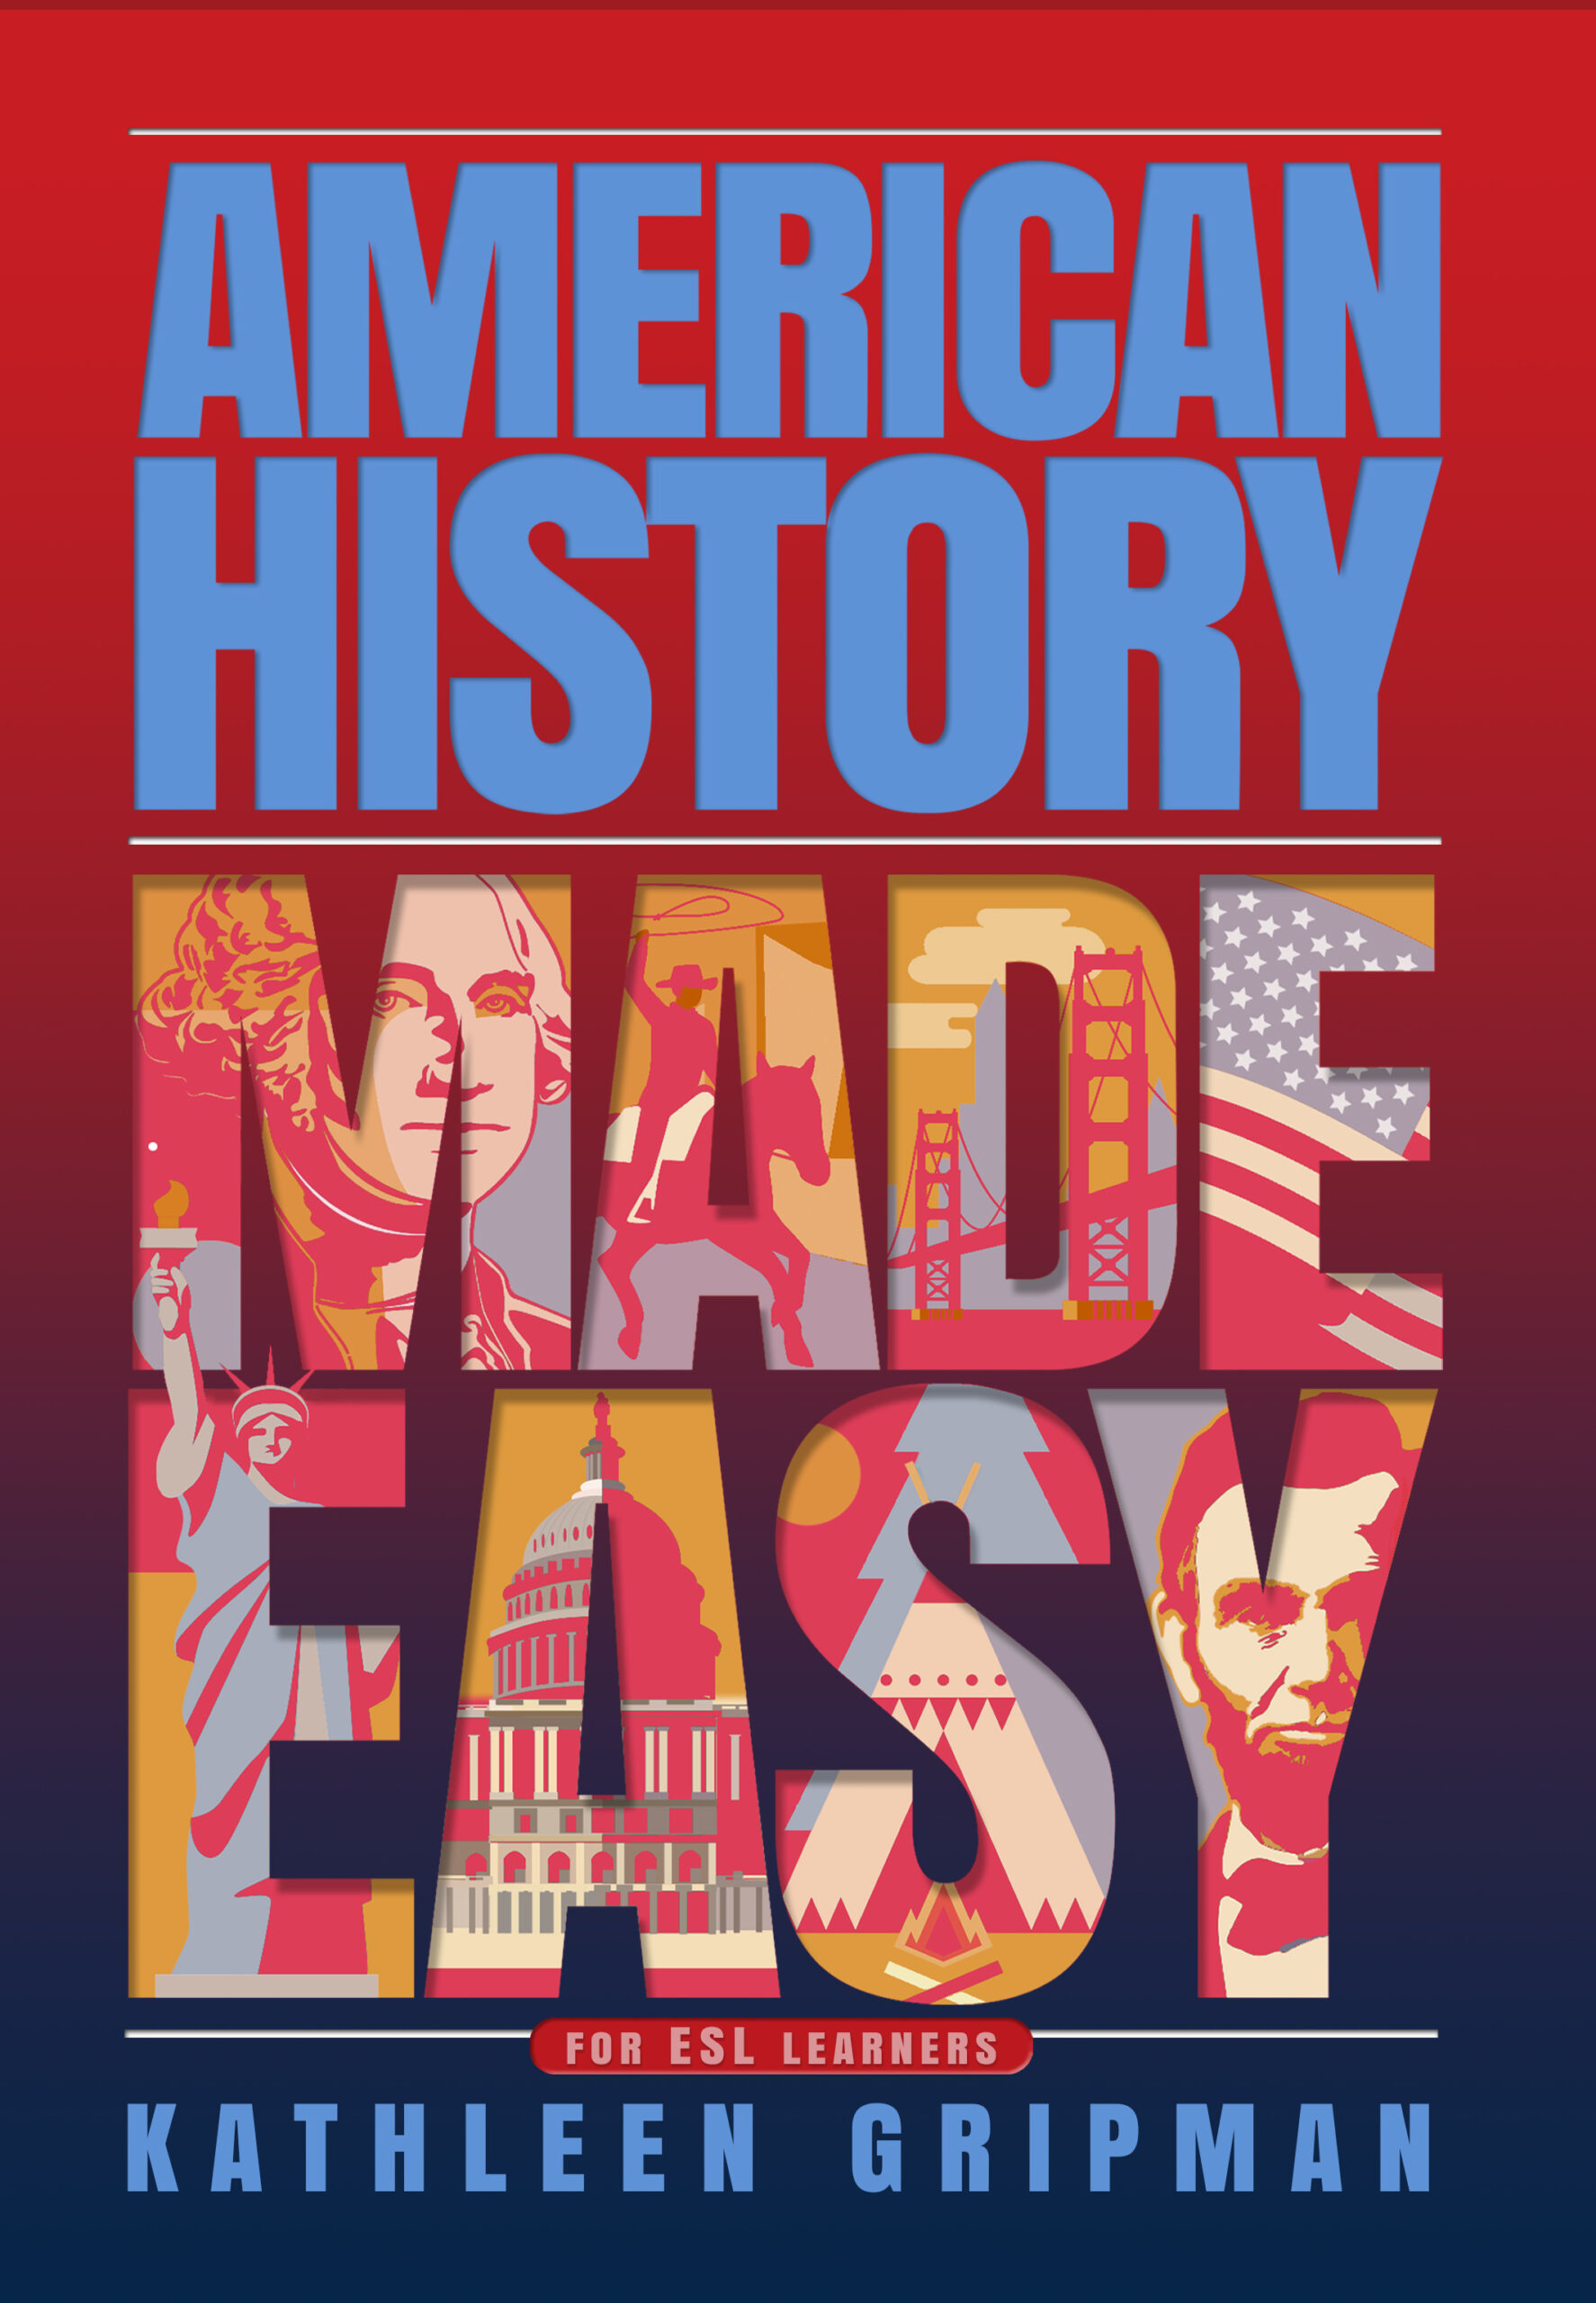 American History Made Easy by Kathleen Gripman book cover